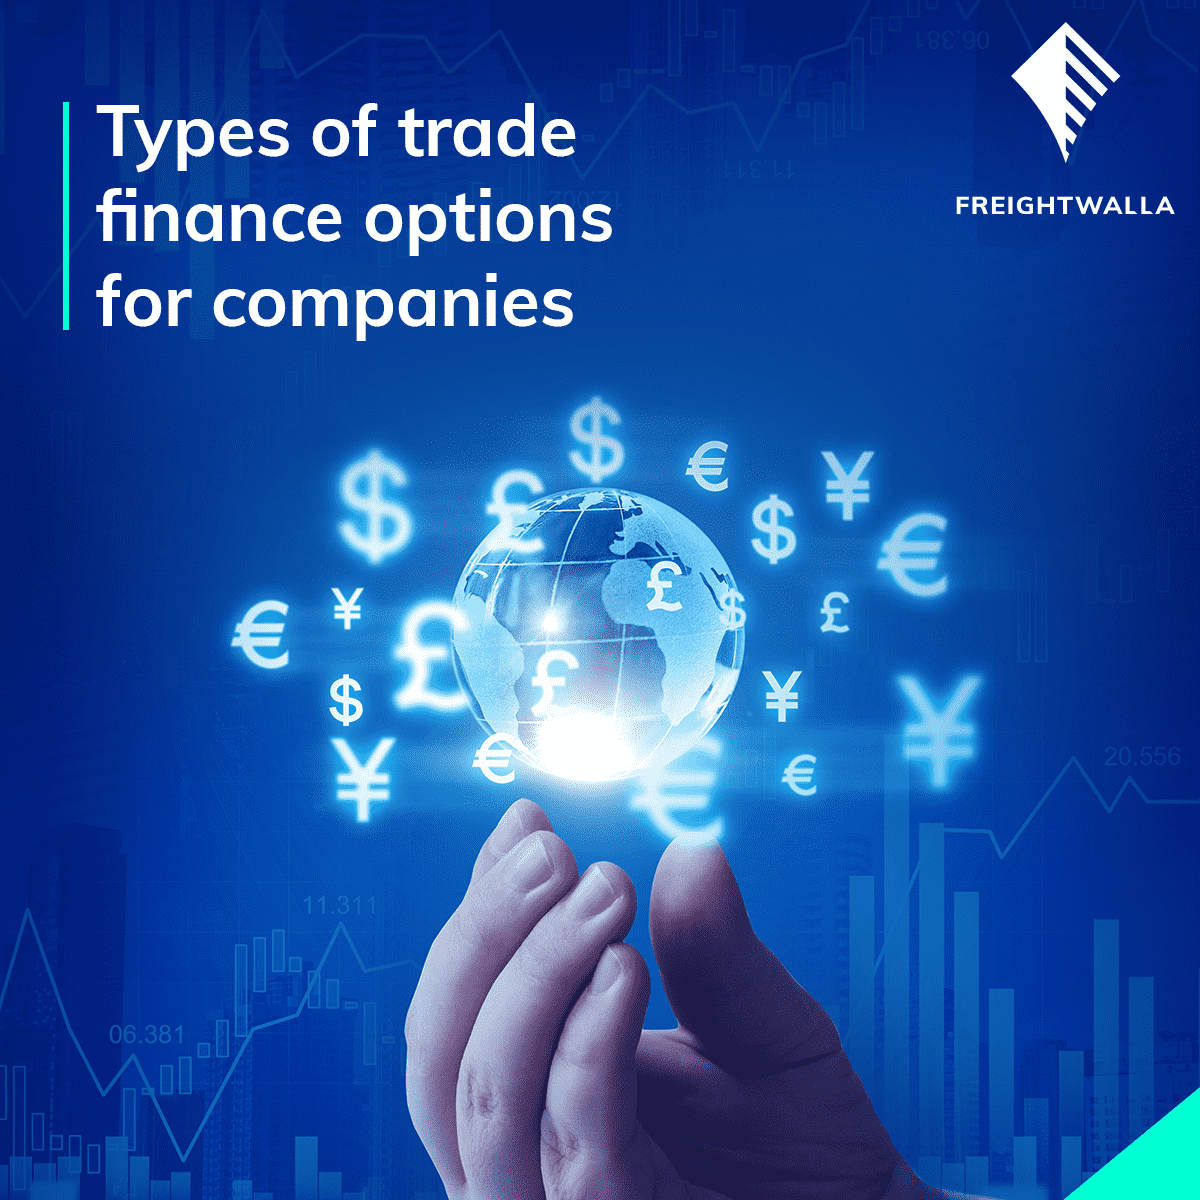 Types of trade finance options for companies